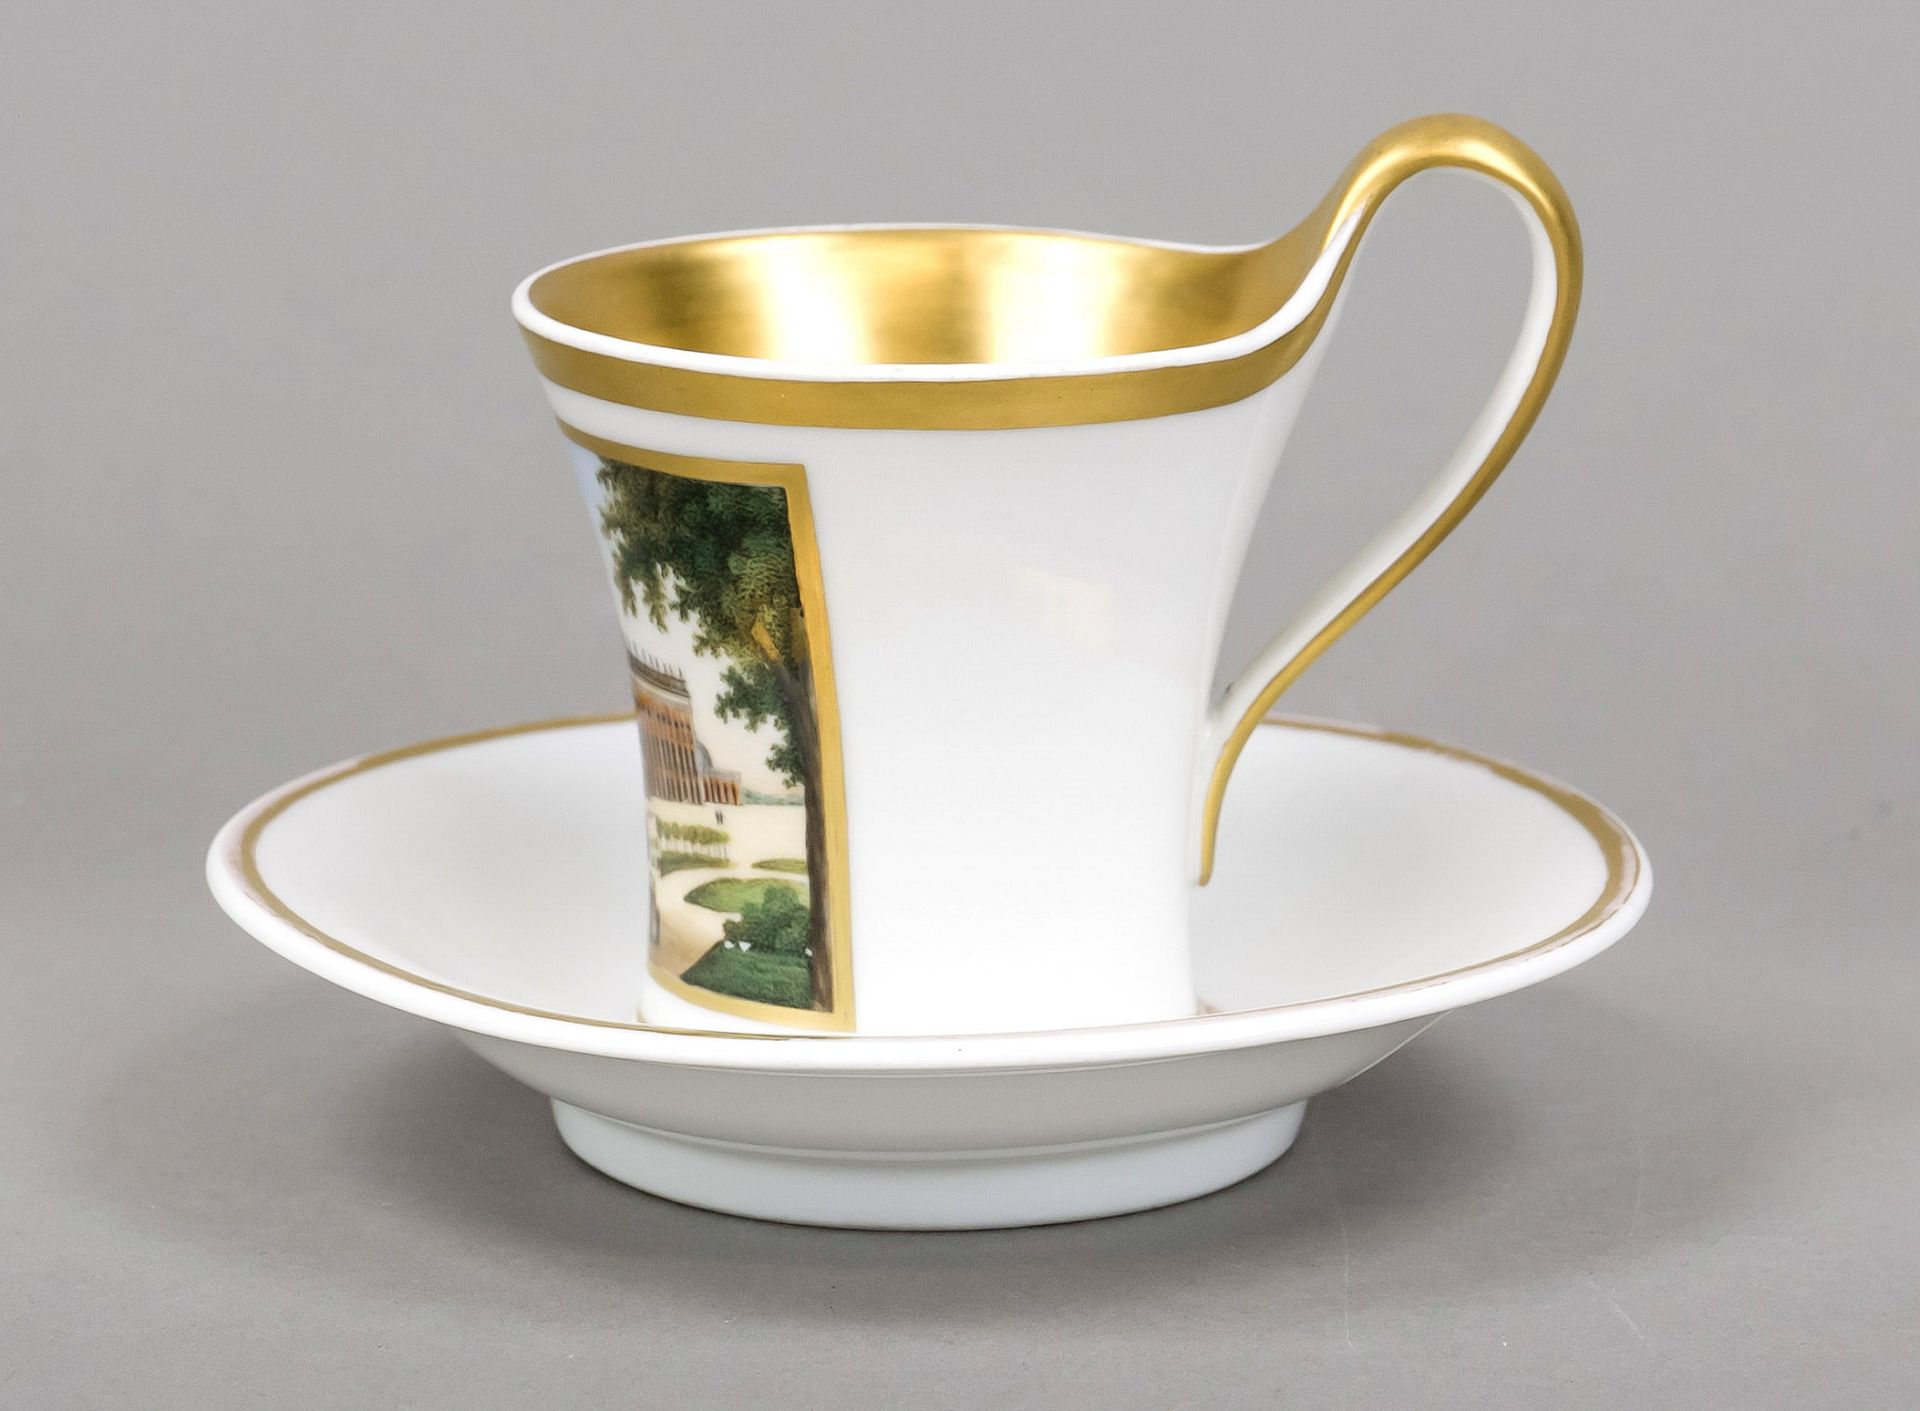 A view cup and saucer, KPM Berlin, mark 1830-40, 1st choice, Calathos form with raised campanile - Image 2 of 2